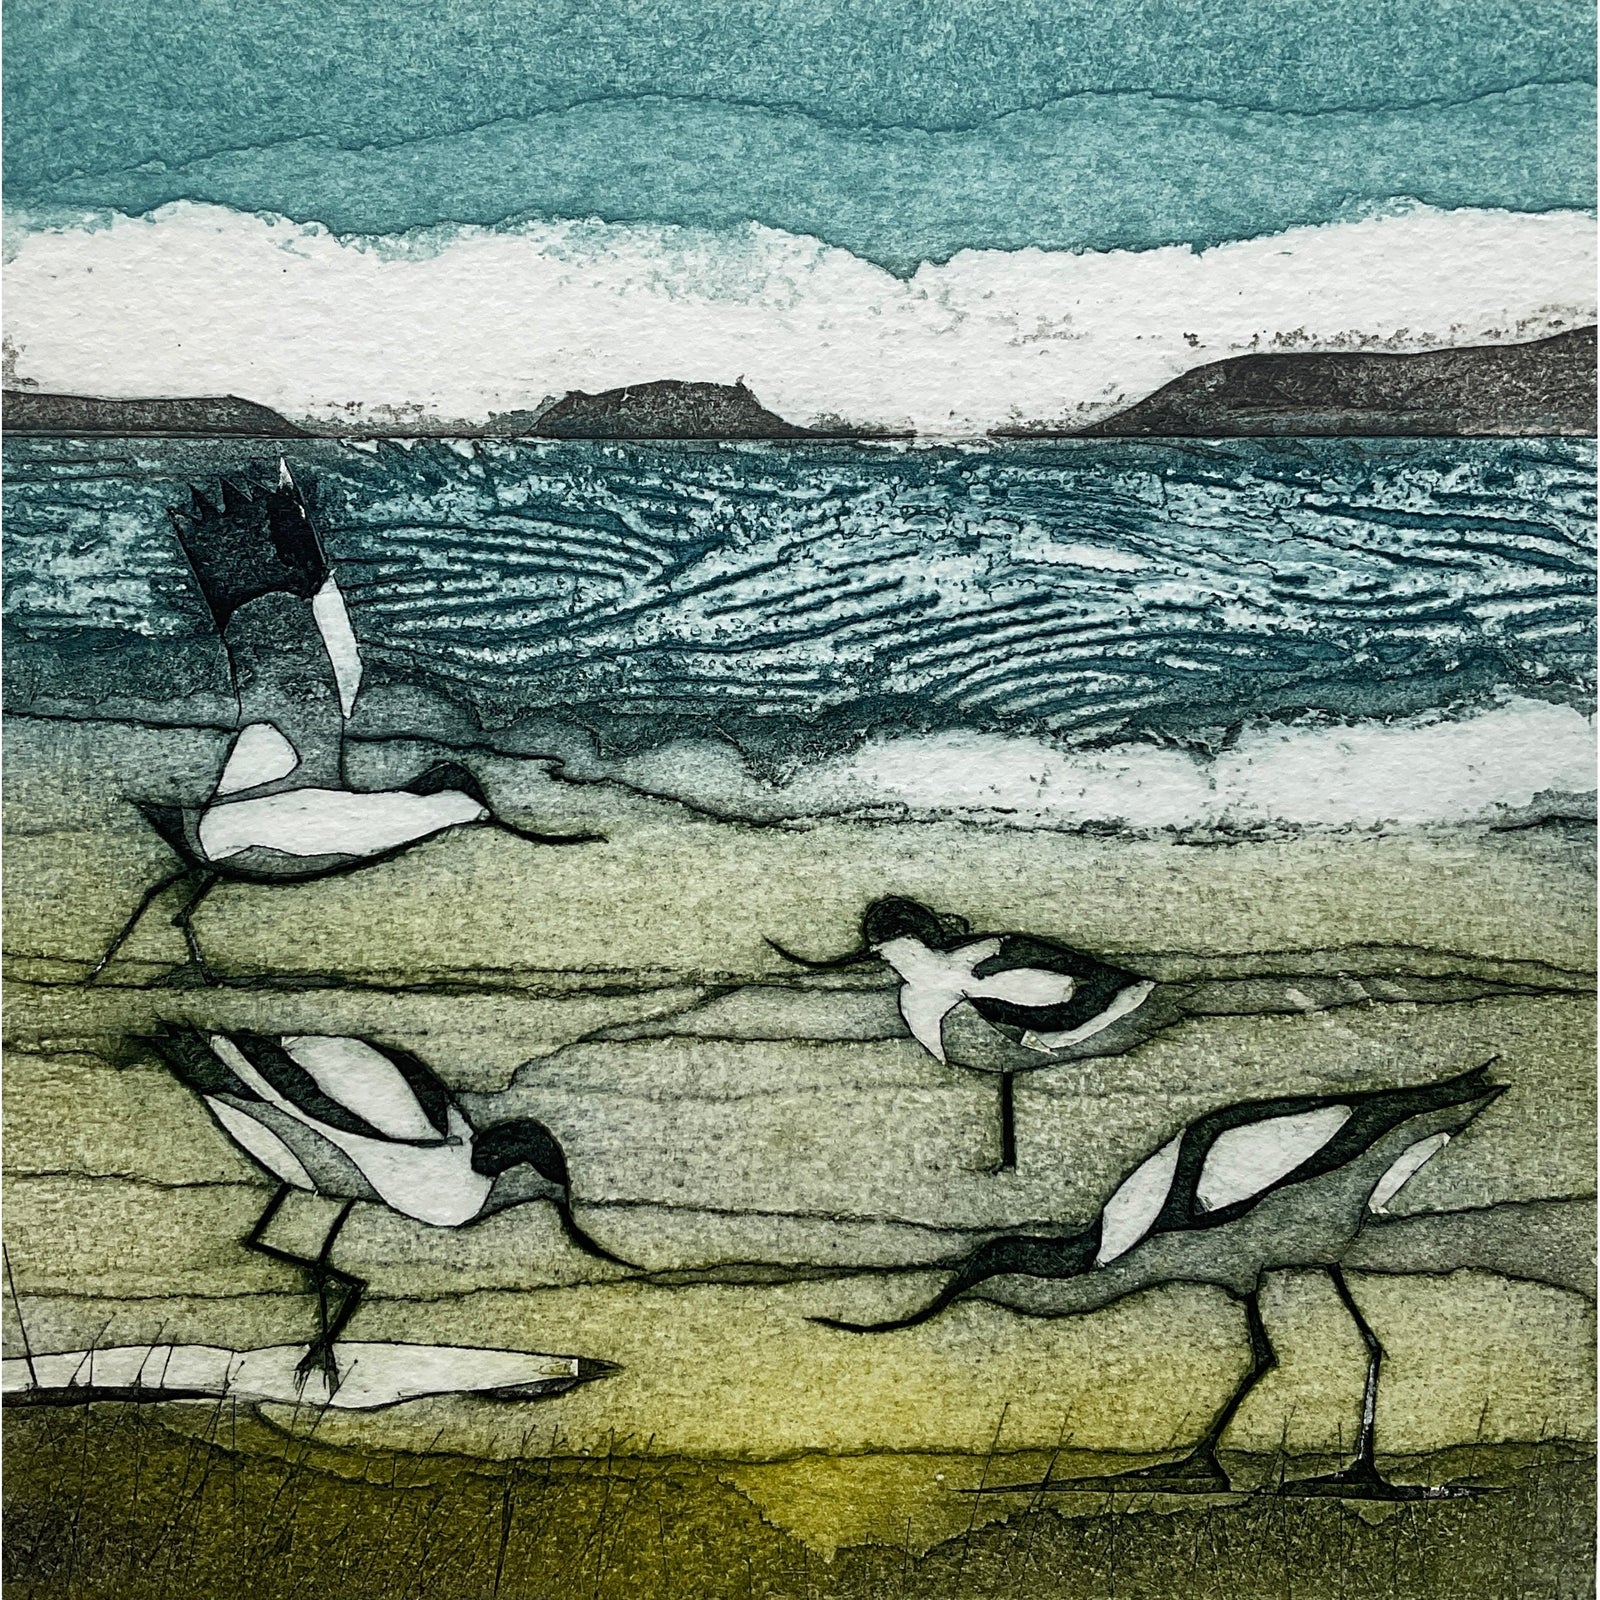 Social Etiquette, limited edition collagraph  by Sarah Ross-Thompson available at Padstow Gallery, Cornwall